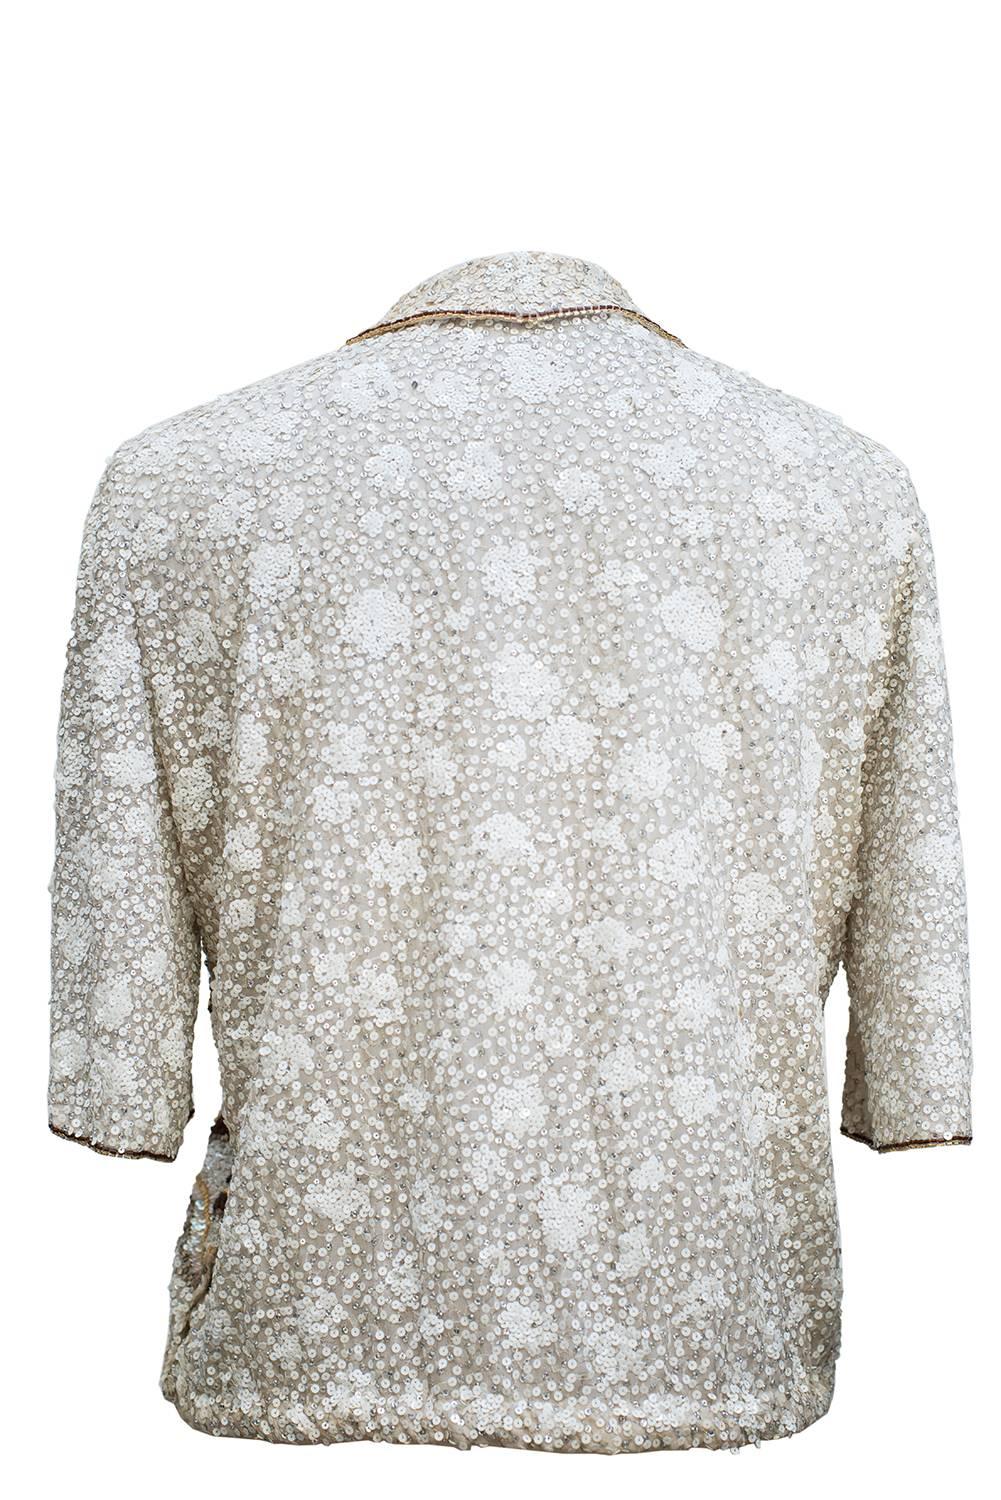 Beige Chirstian Dior Paris, Spring/Summer Collection 1986 Haute Couture, Sequined, Top For Sale